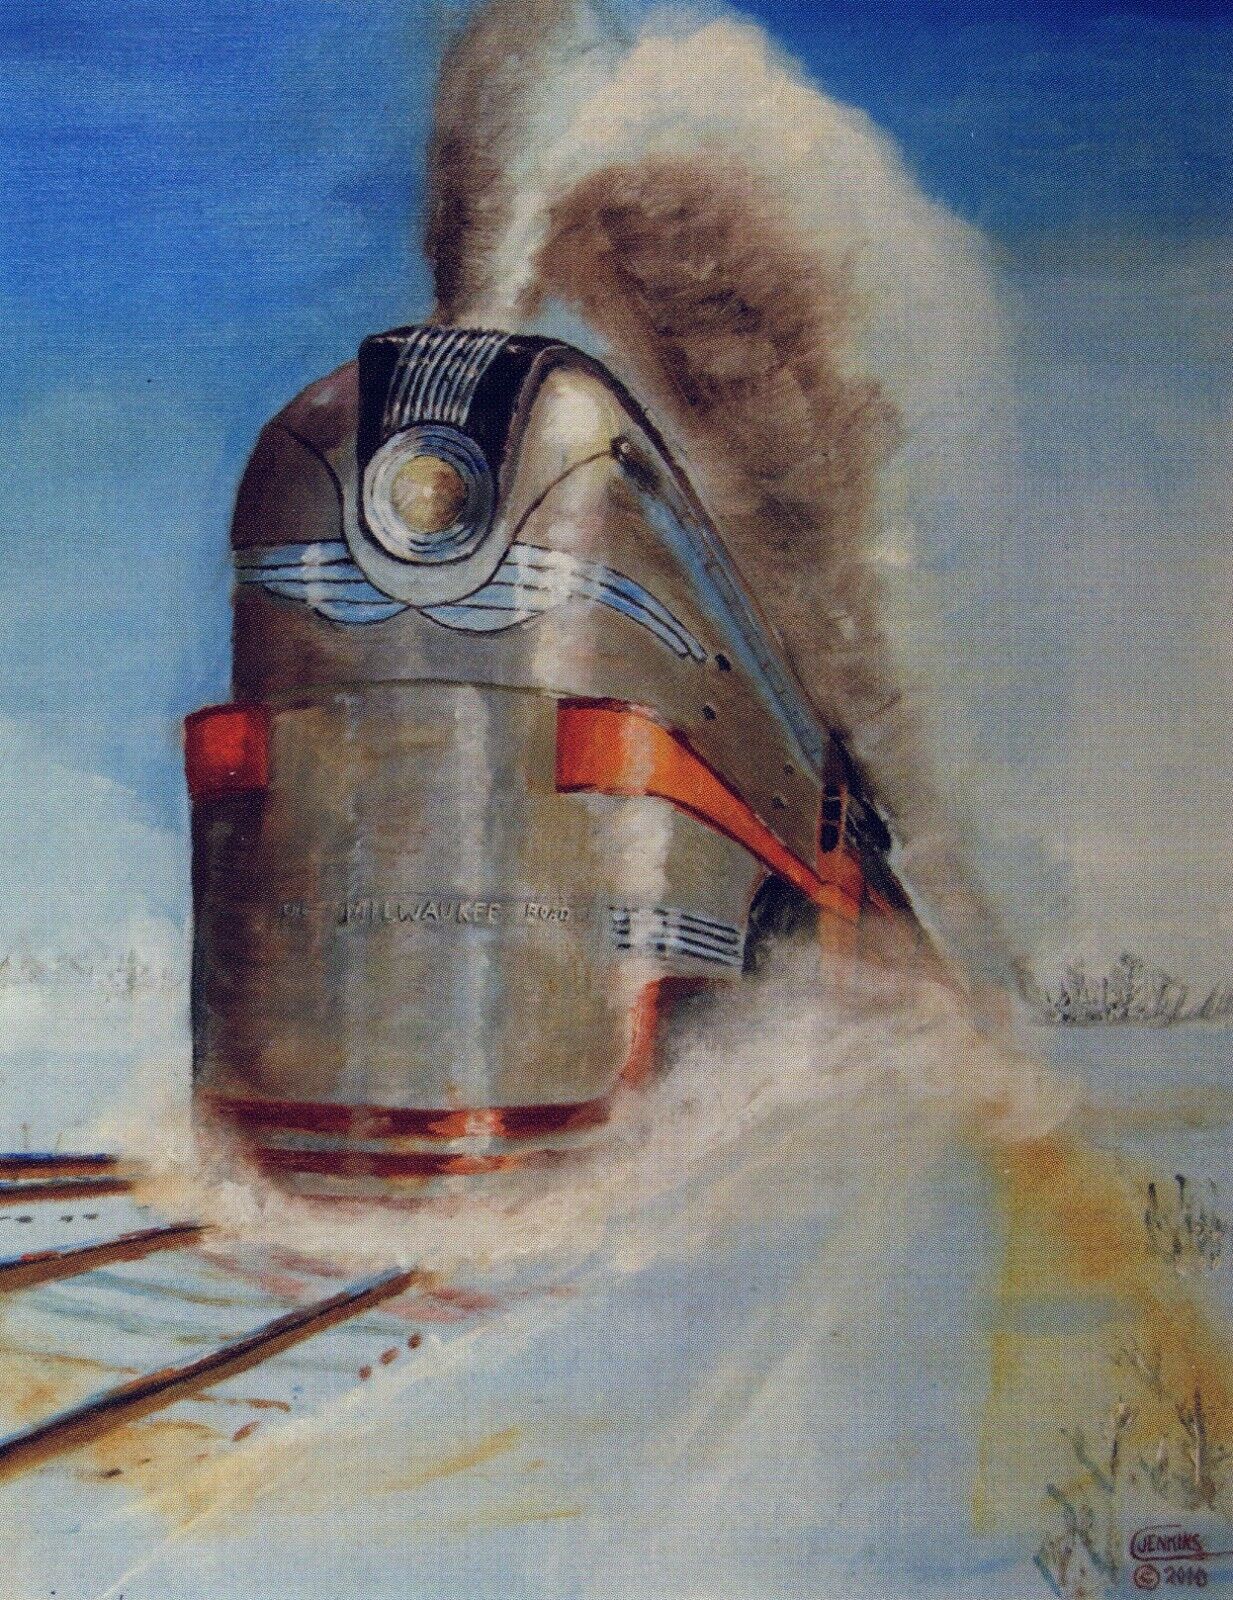 10 postcards of painting of a Milwaukee Road Streamliner  CMstP&P  